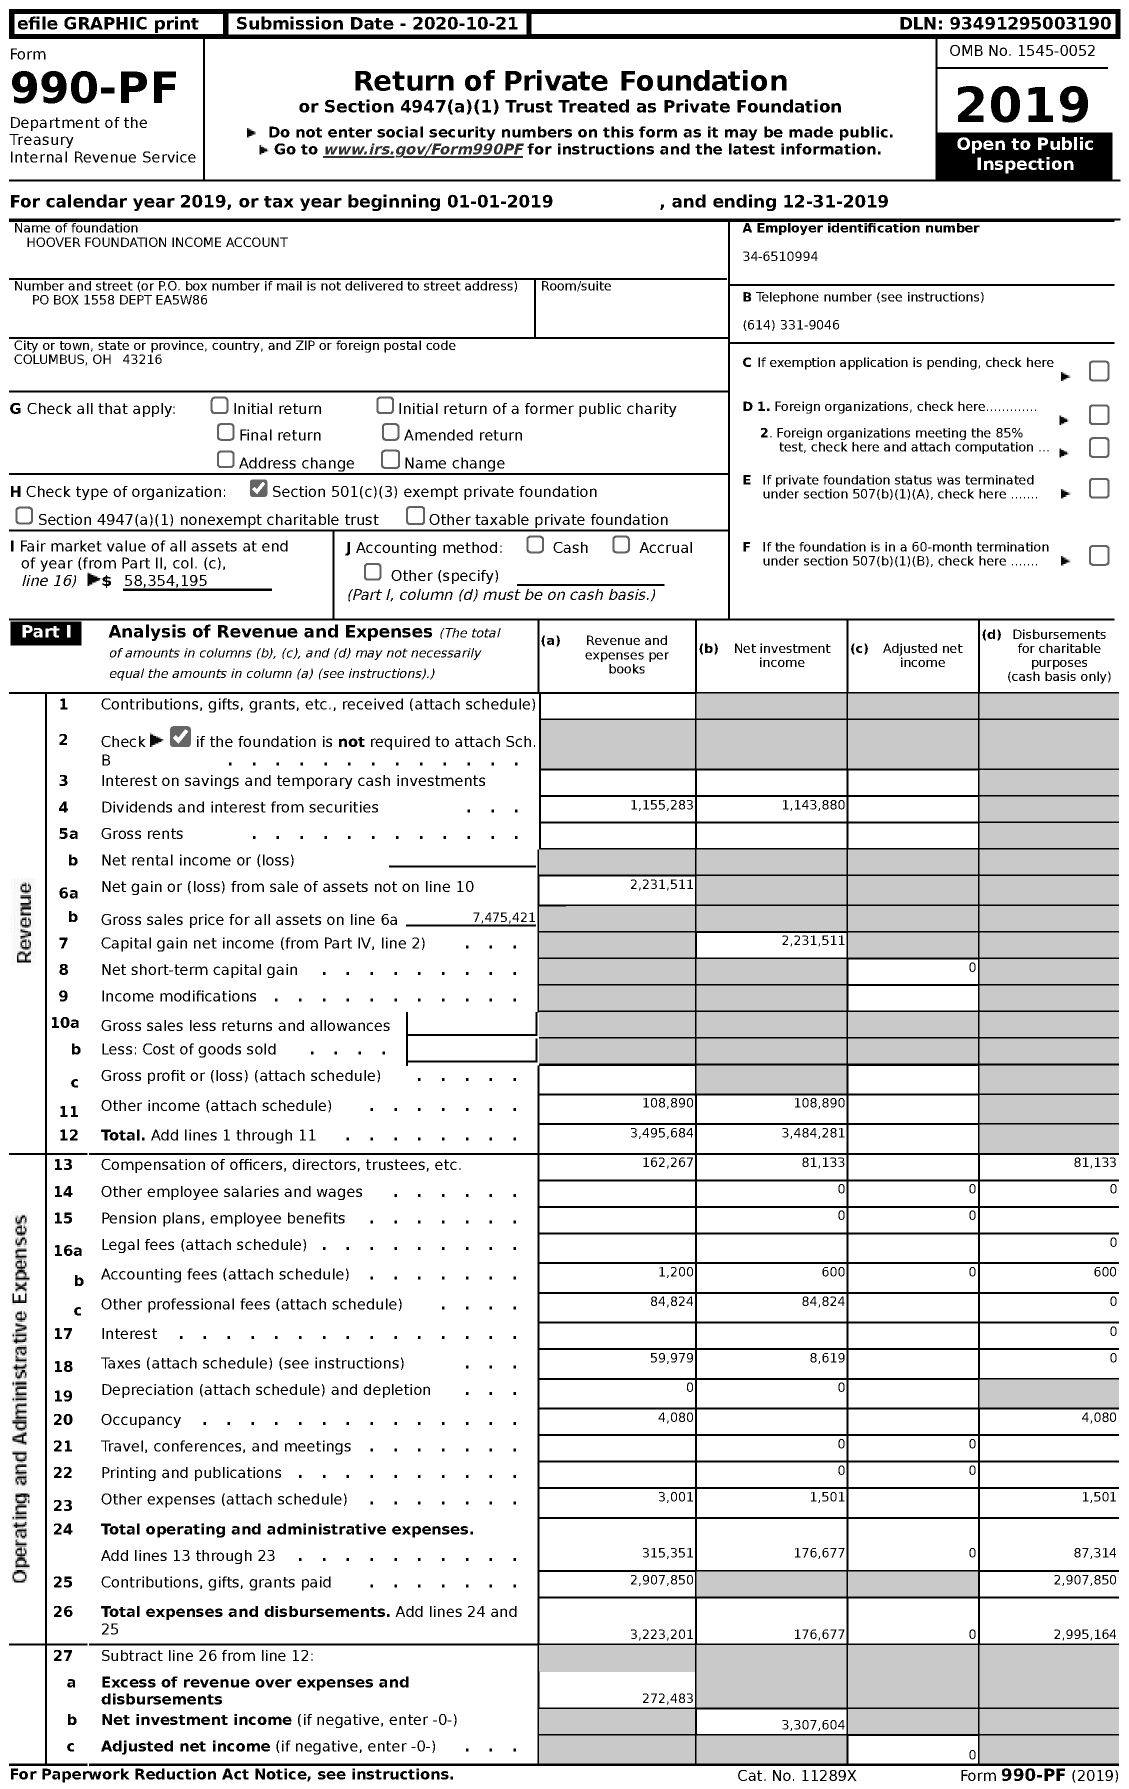 Image of first page of 2019 Form 990PF for Hoover Foundation Income Account